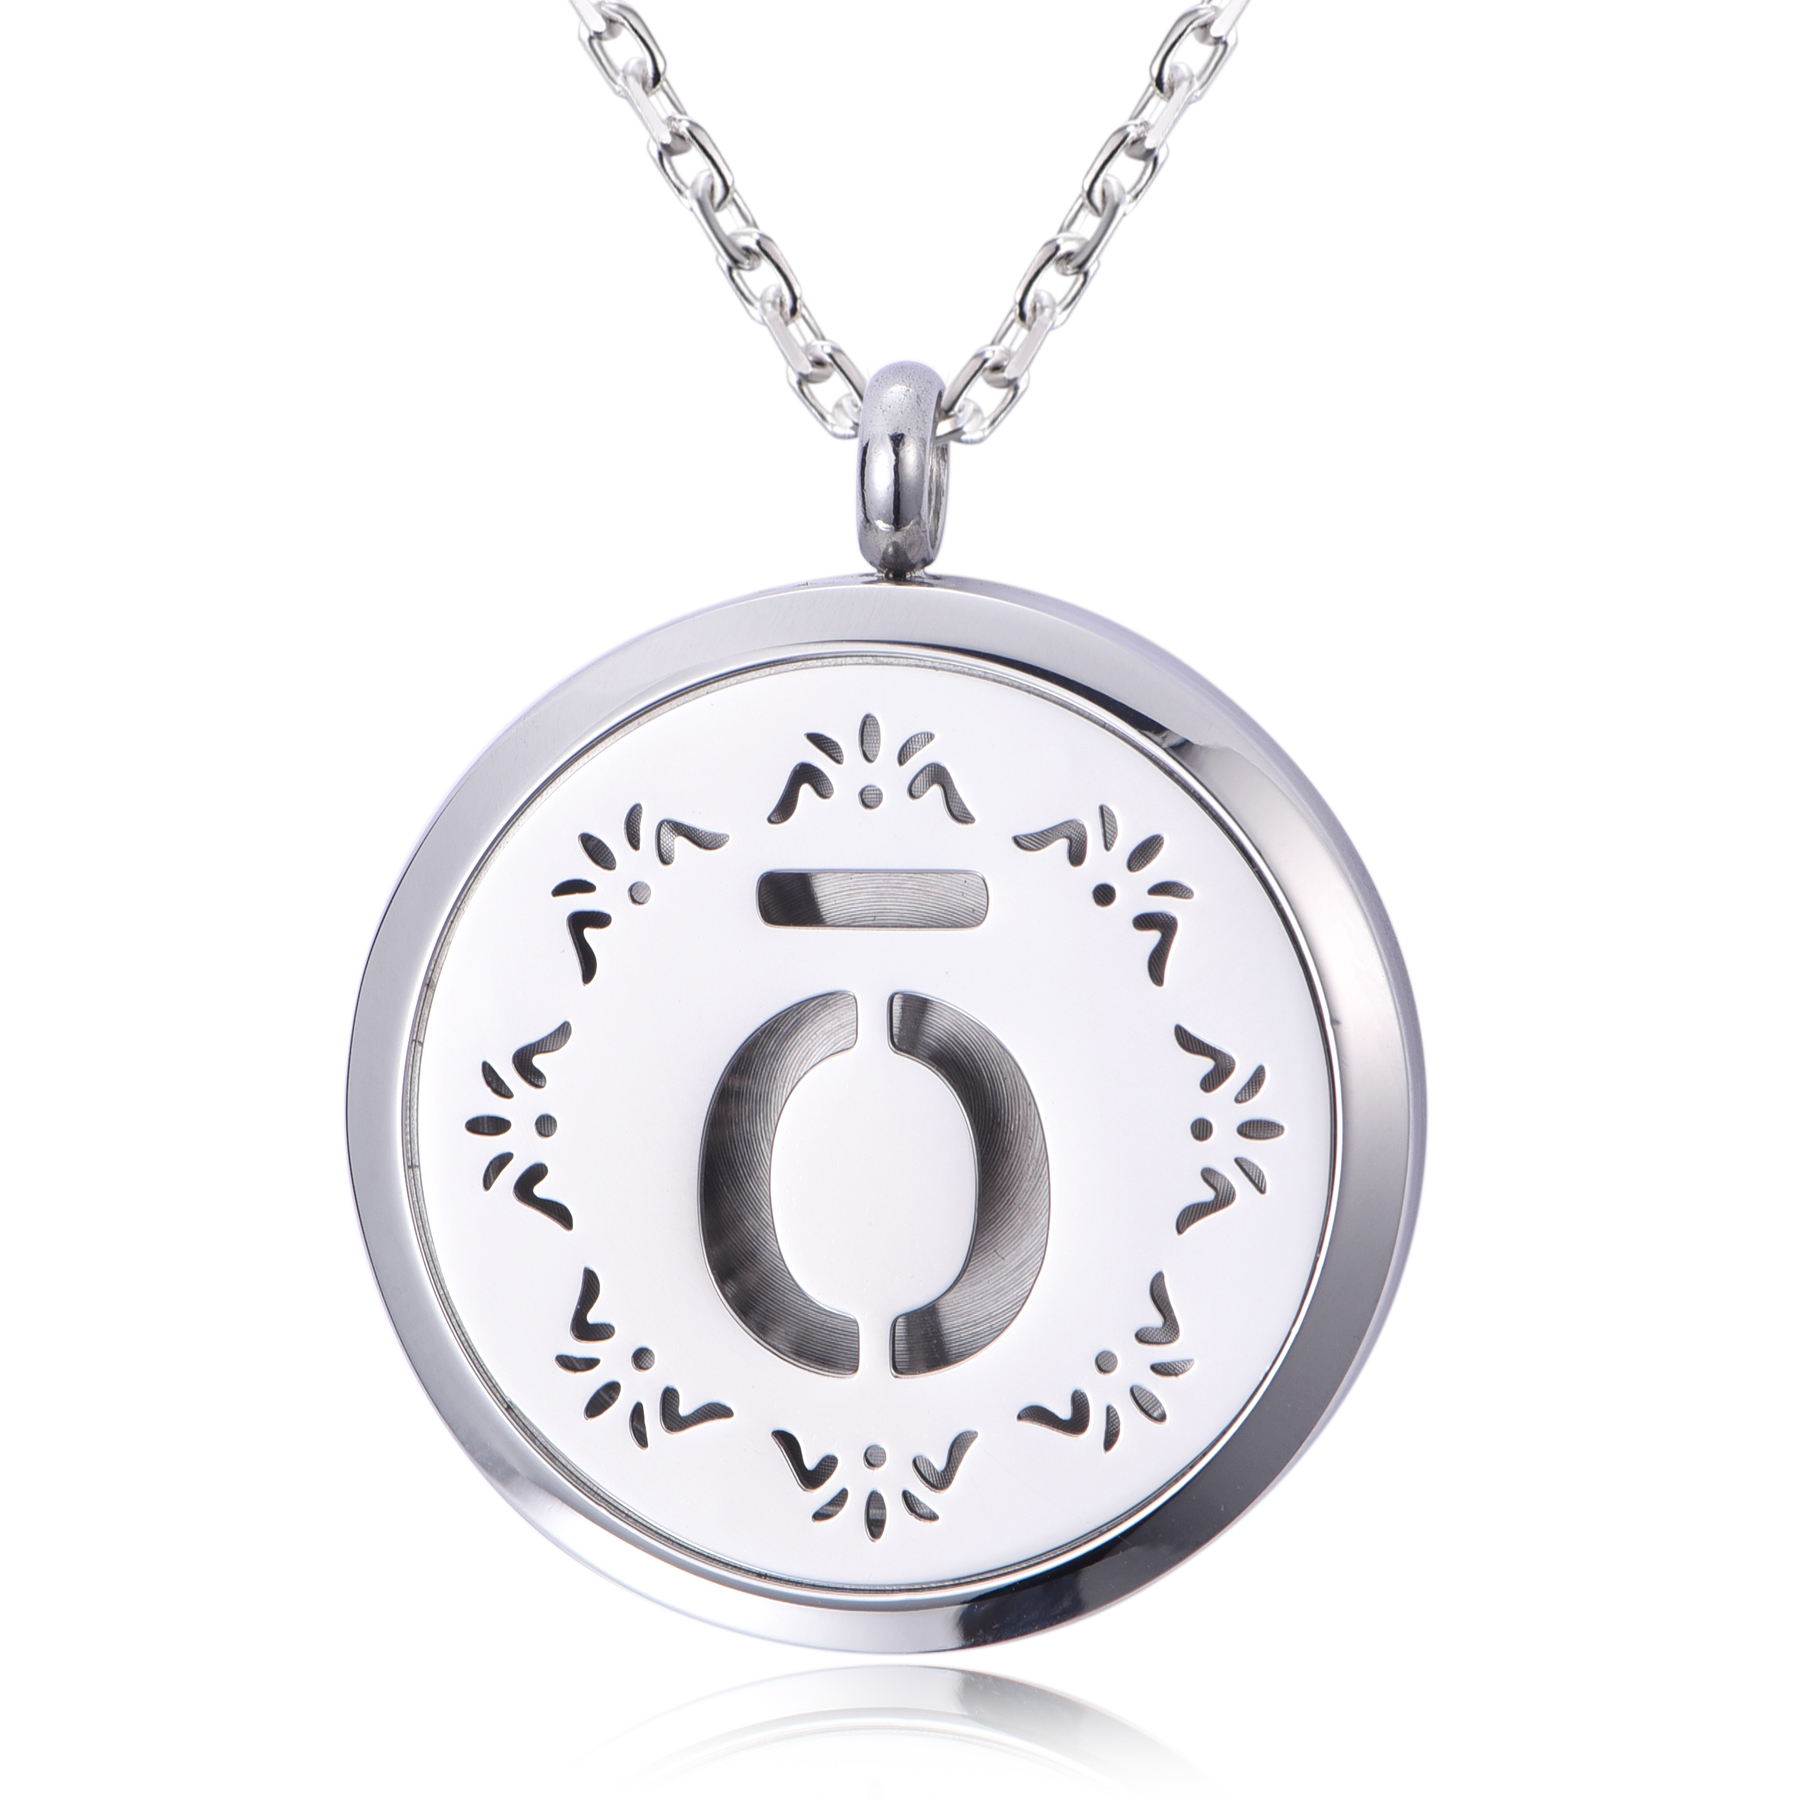 Fashion Stainless Steel Snowflake Essential Oil Diffuse Locket Pendant Necklace NH9-02